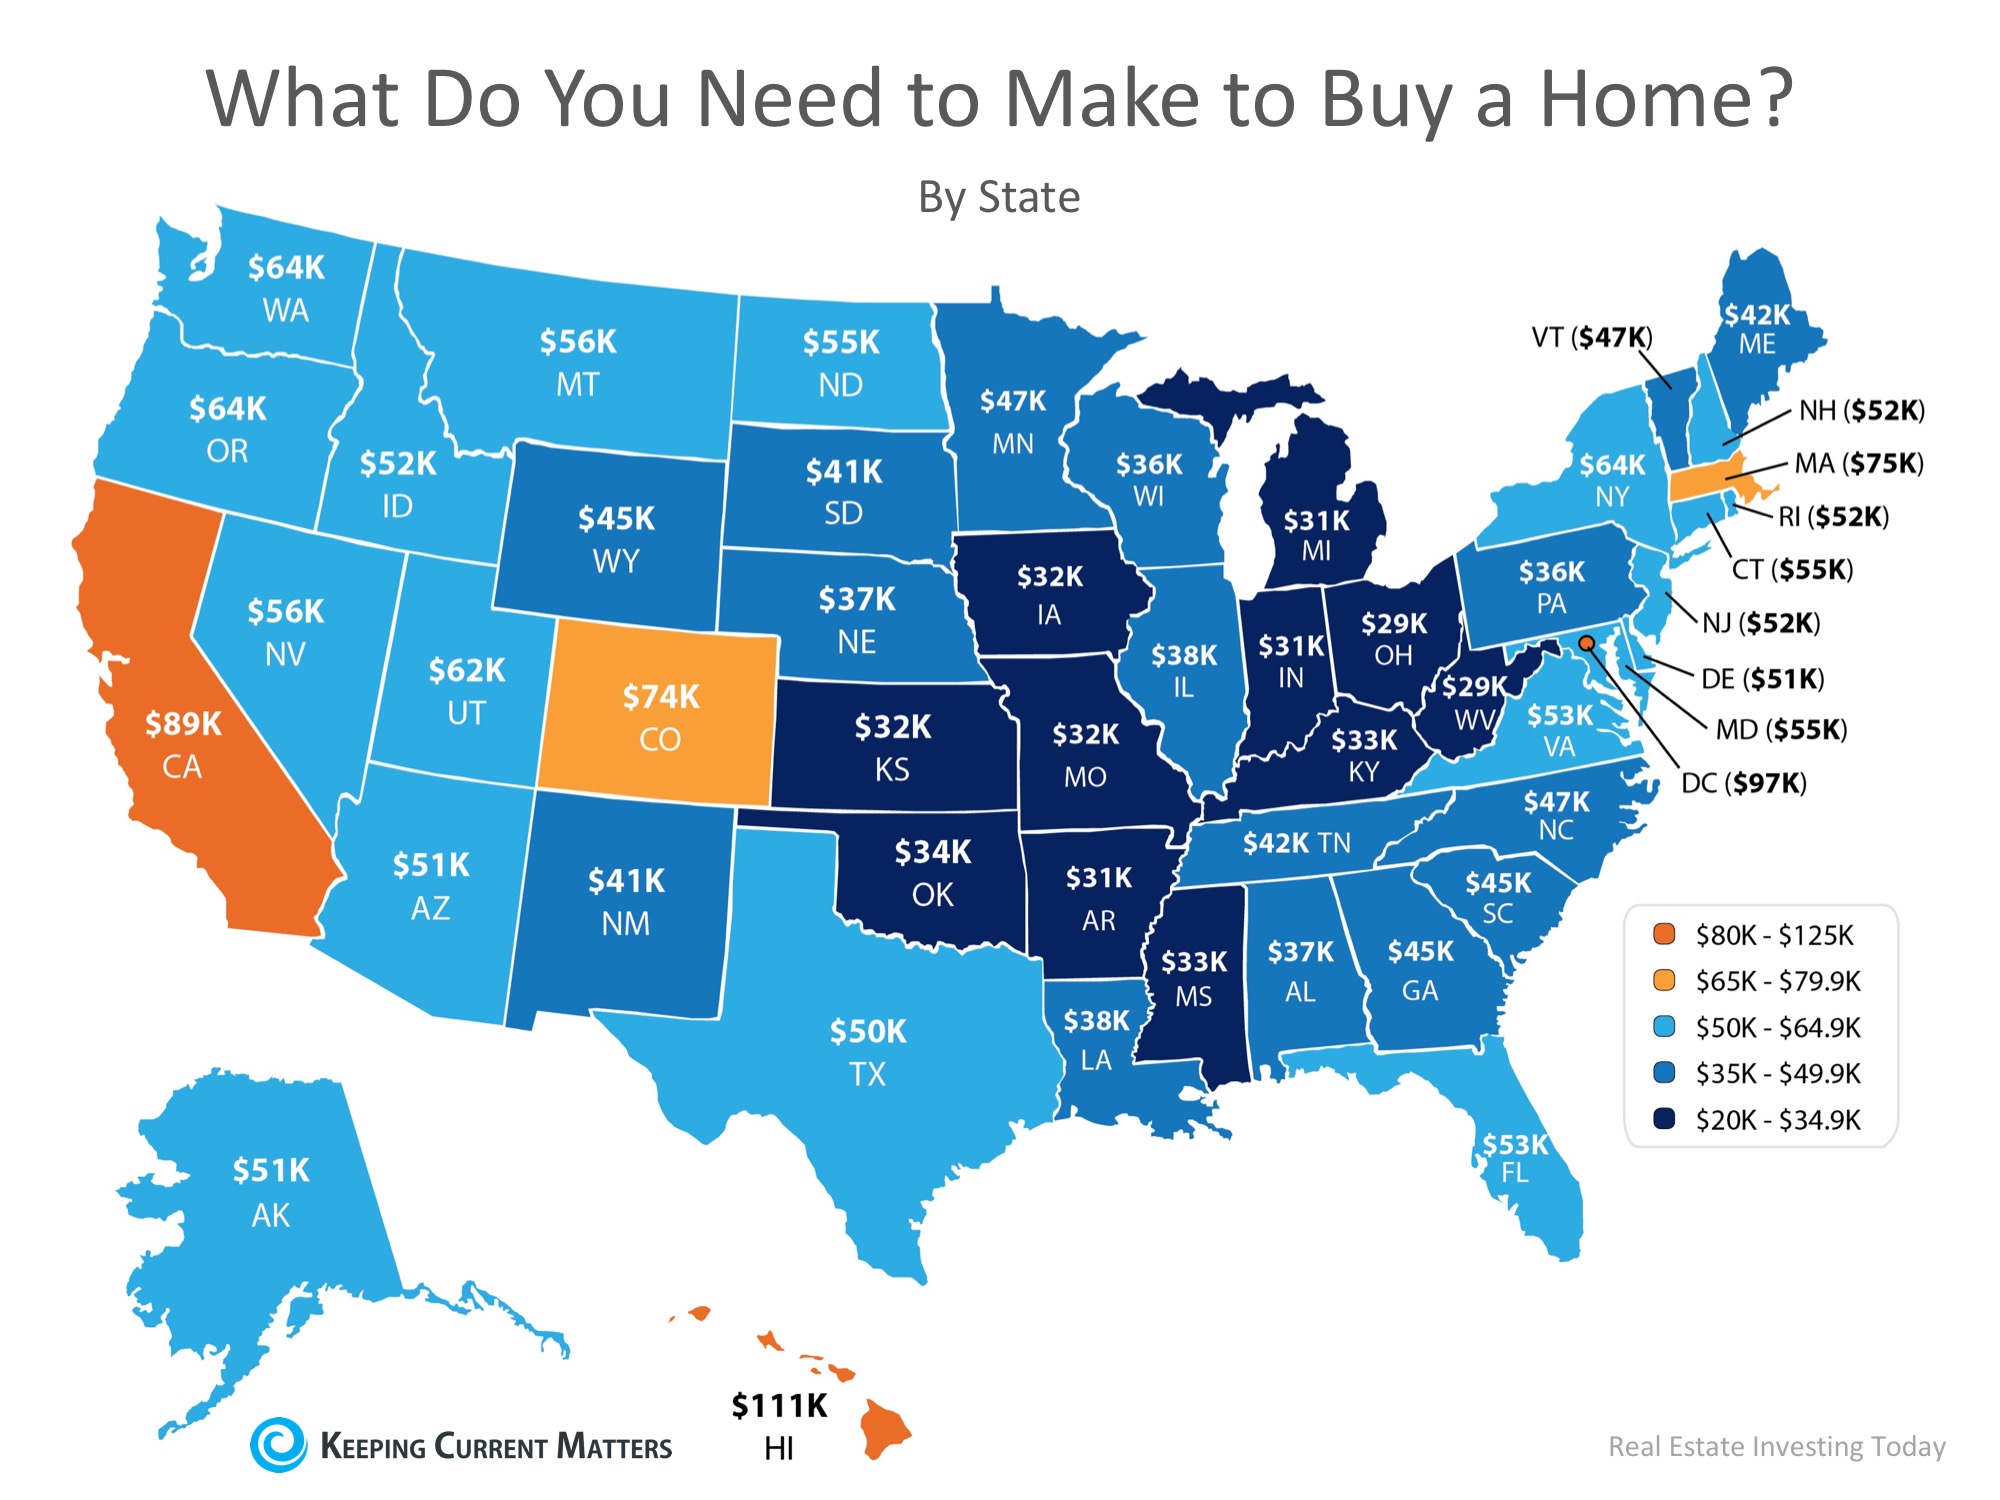 How Much Do You Need to Make to Buy a Home in Your State?